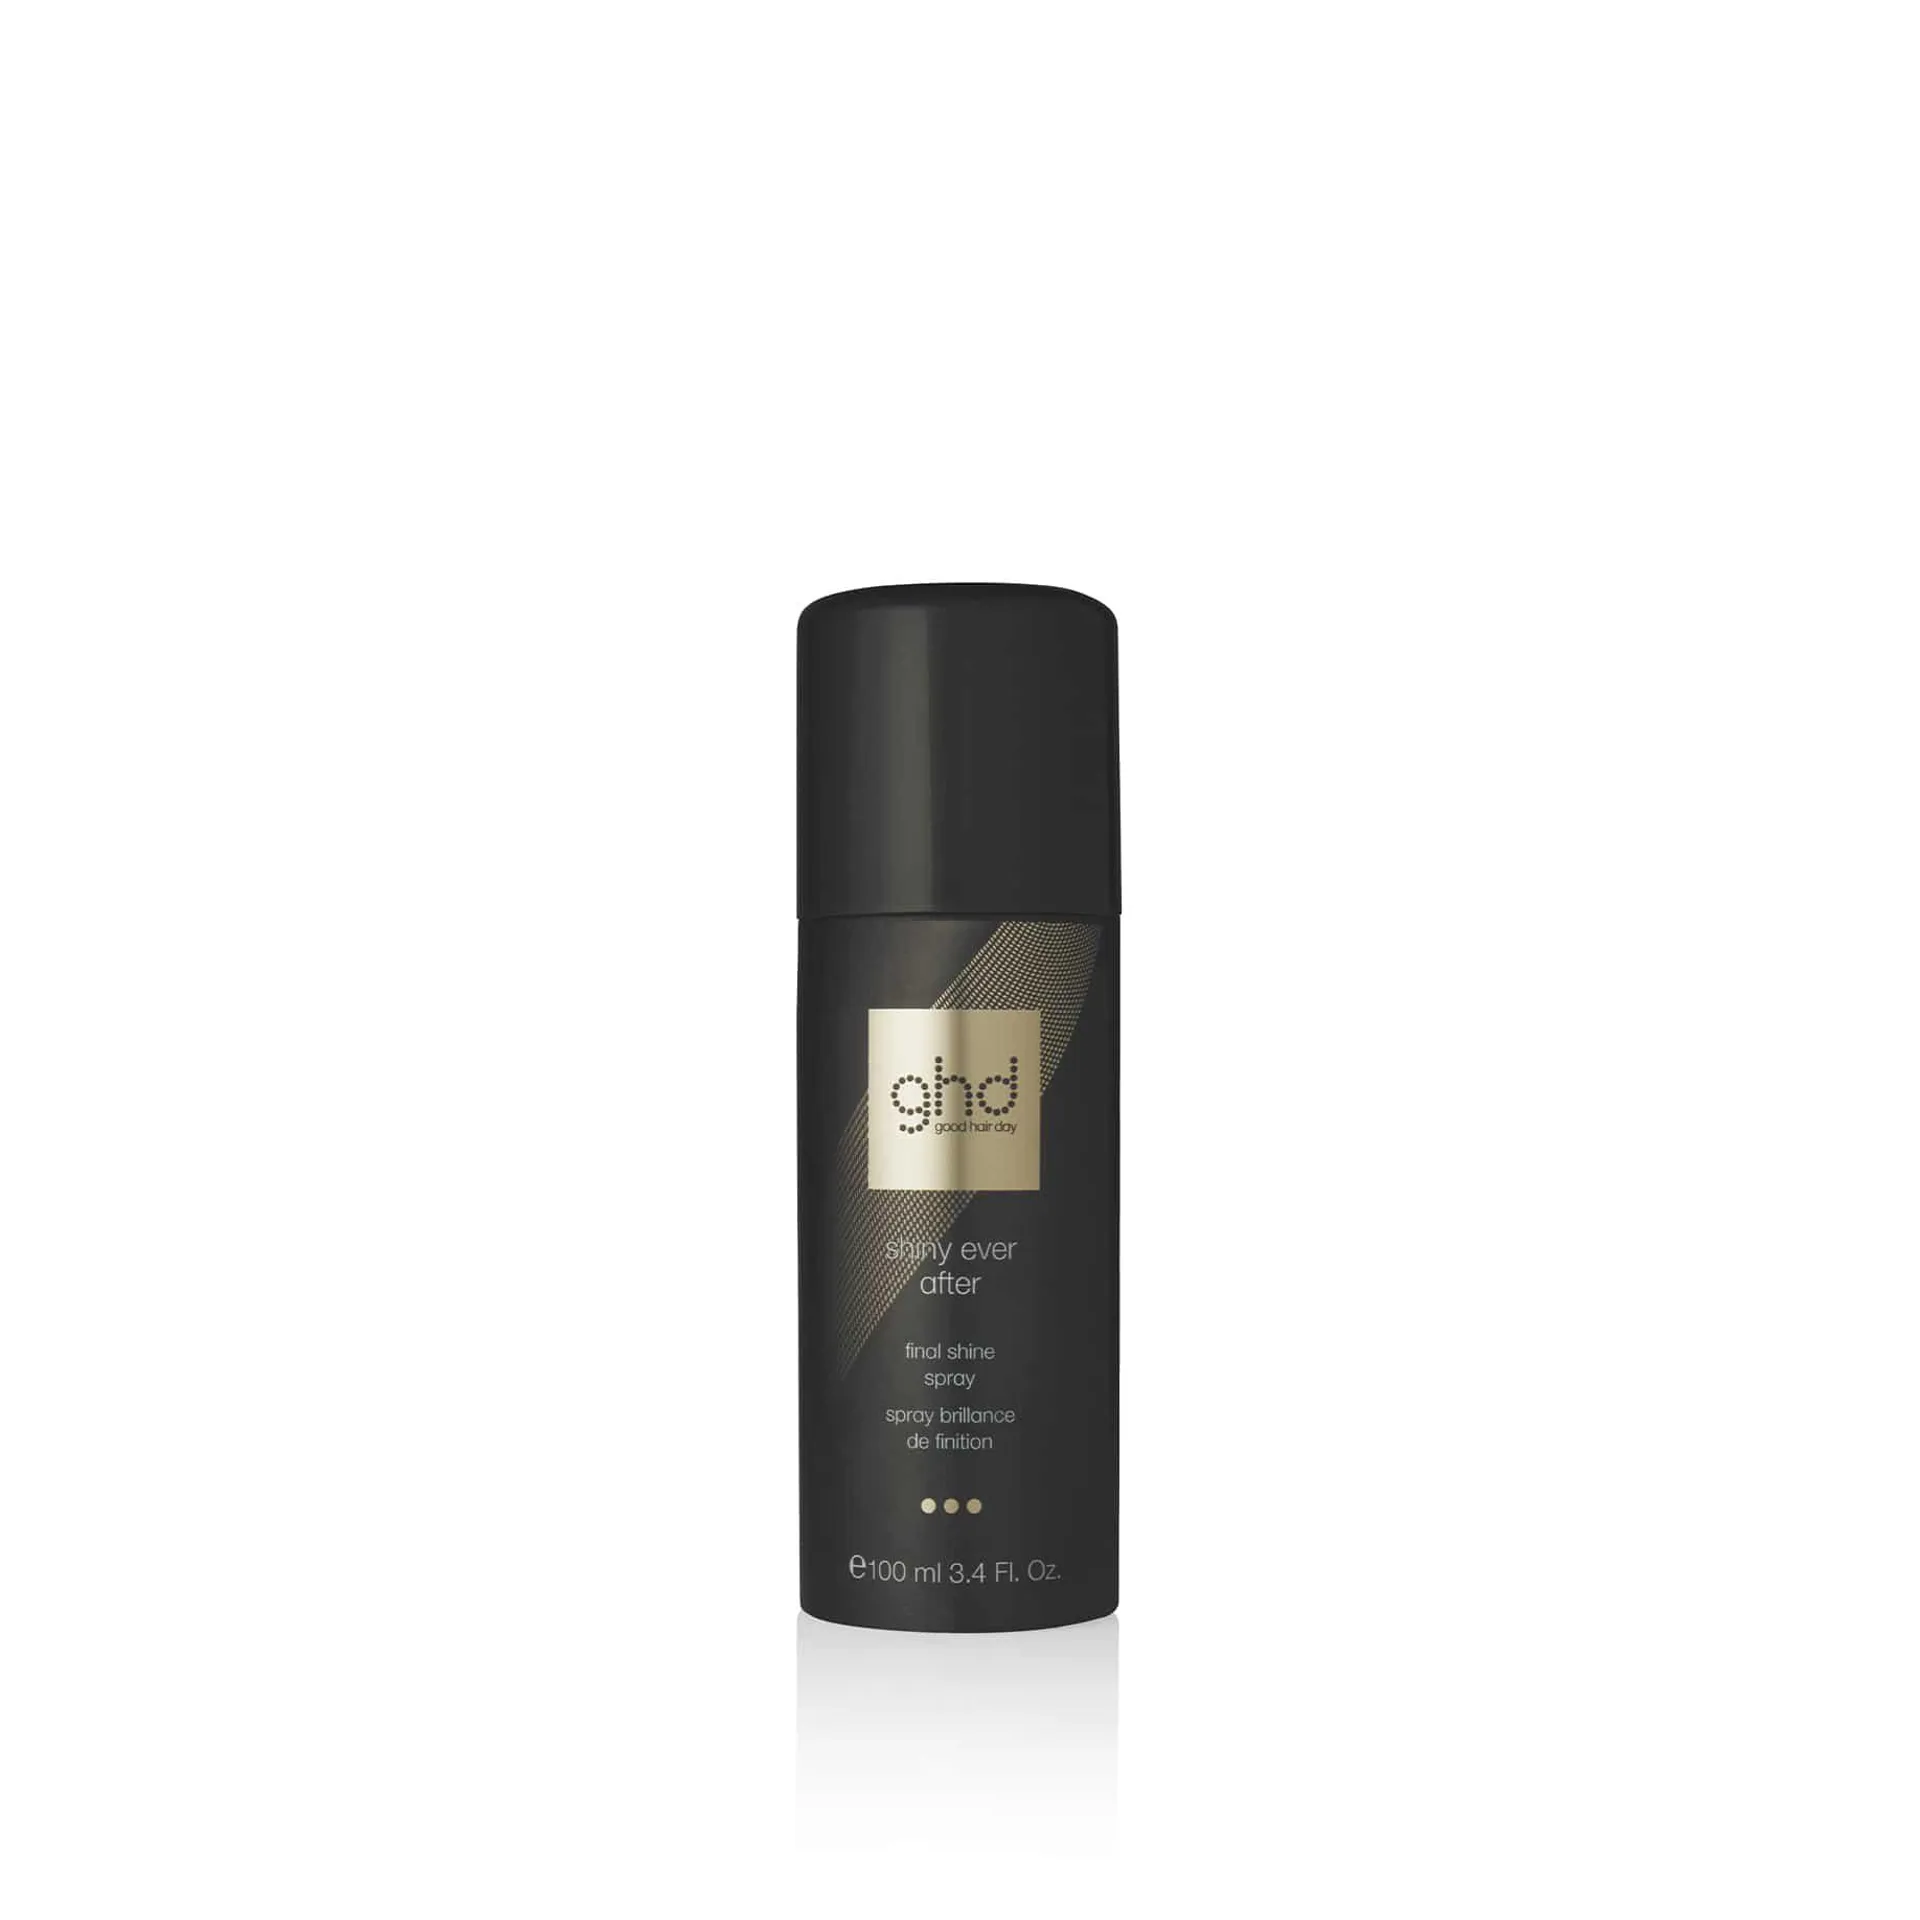 GHD SHINY EVER AFTER - FINAL SHINE SPRAY